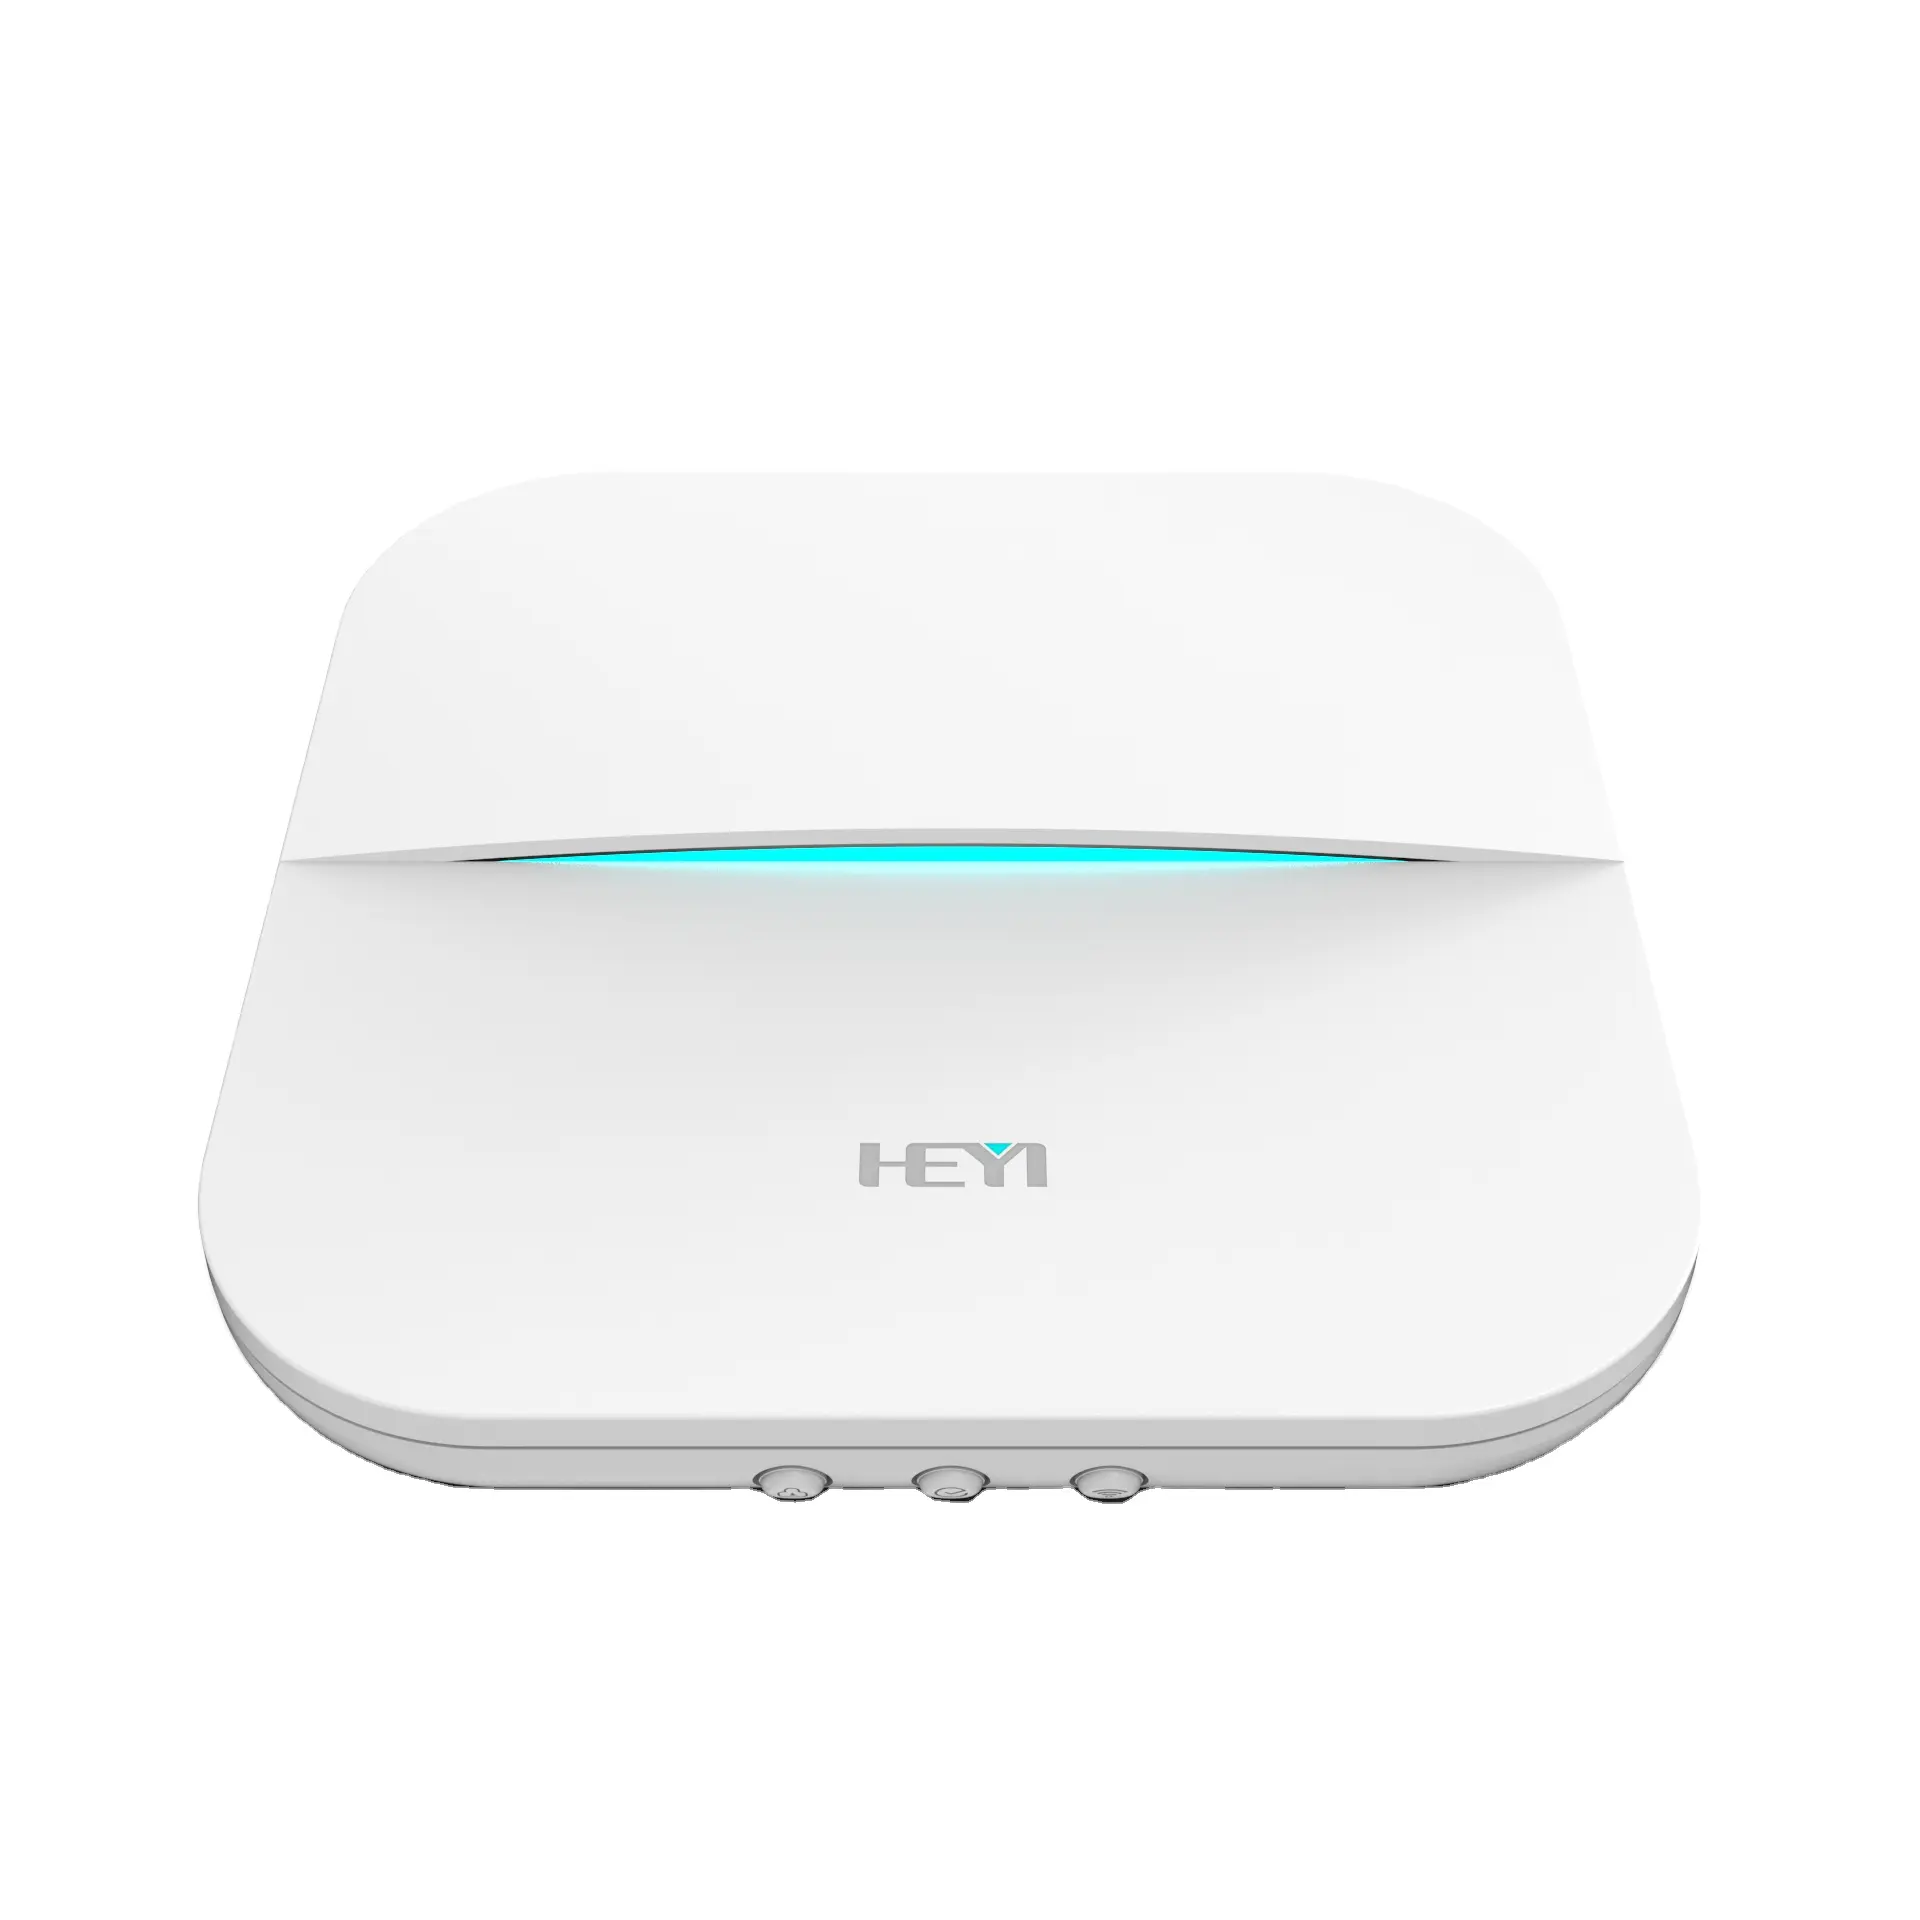 Heyi Wireless House Security Alarm System WIFI GSM 3G Smart Alarm Personal Support 8 PCS White